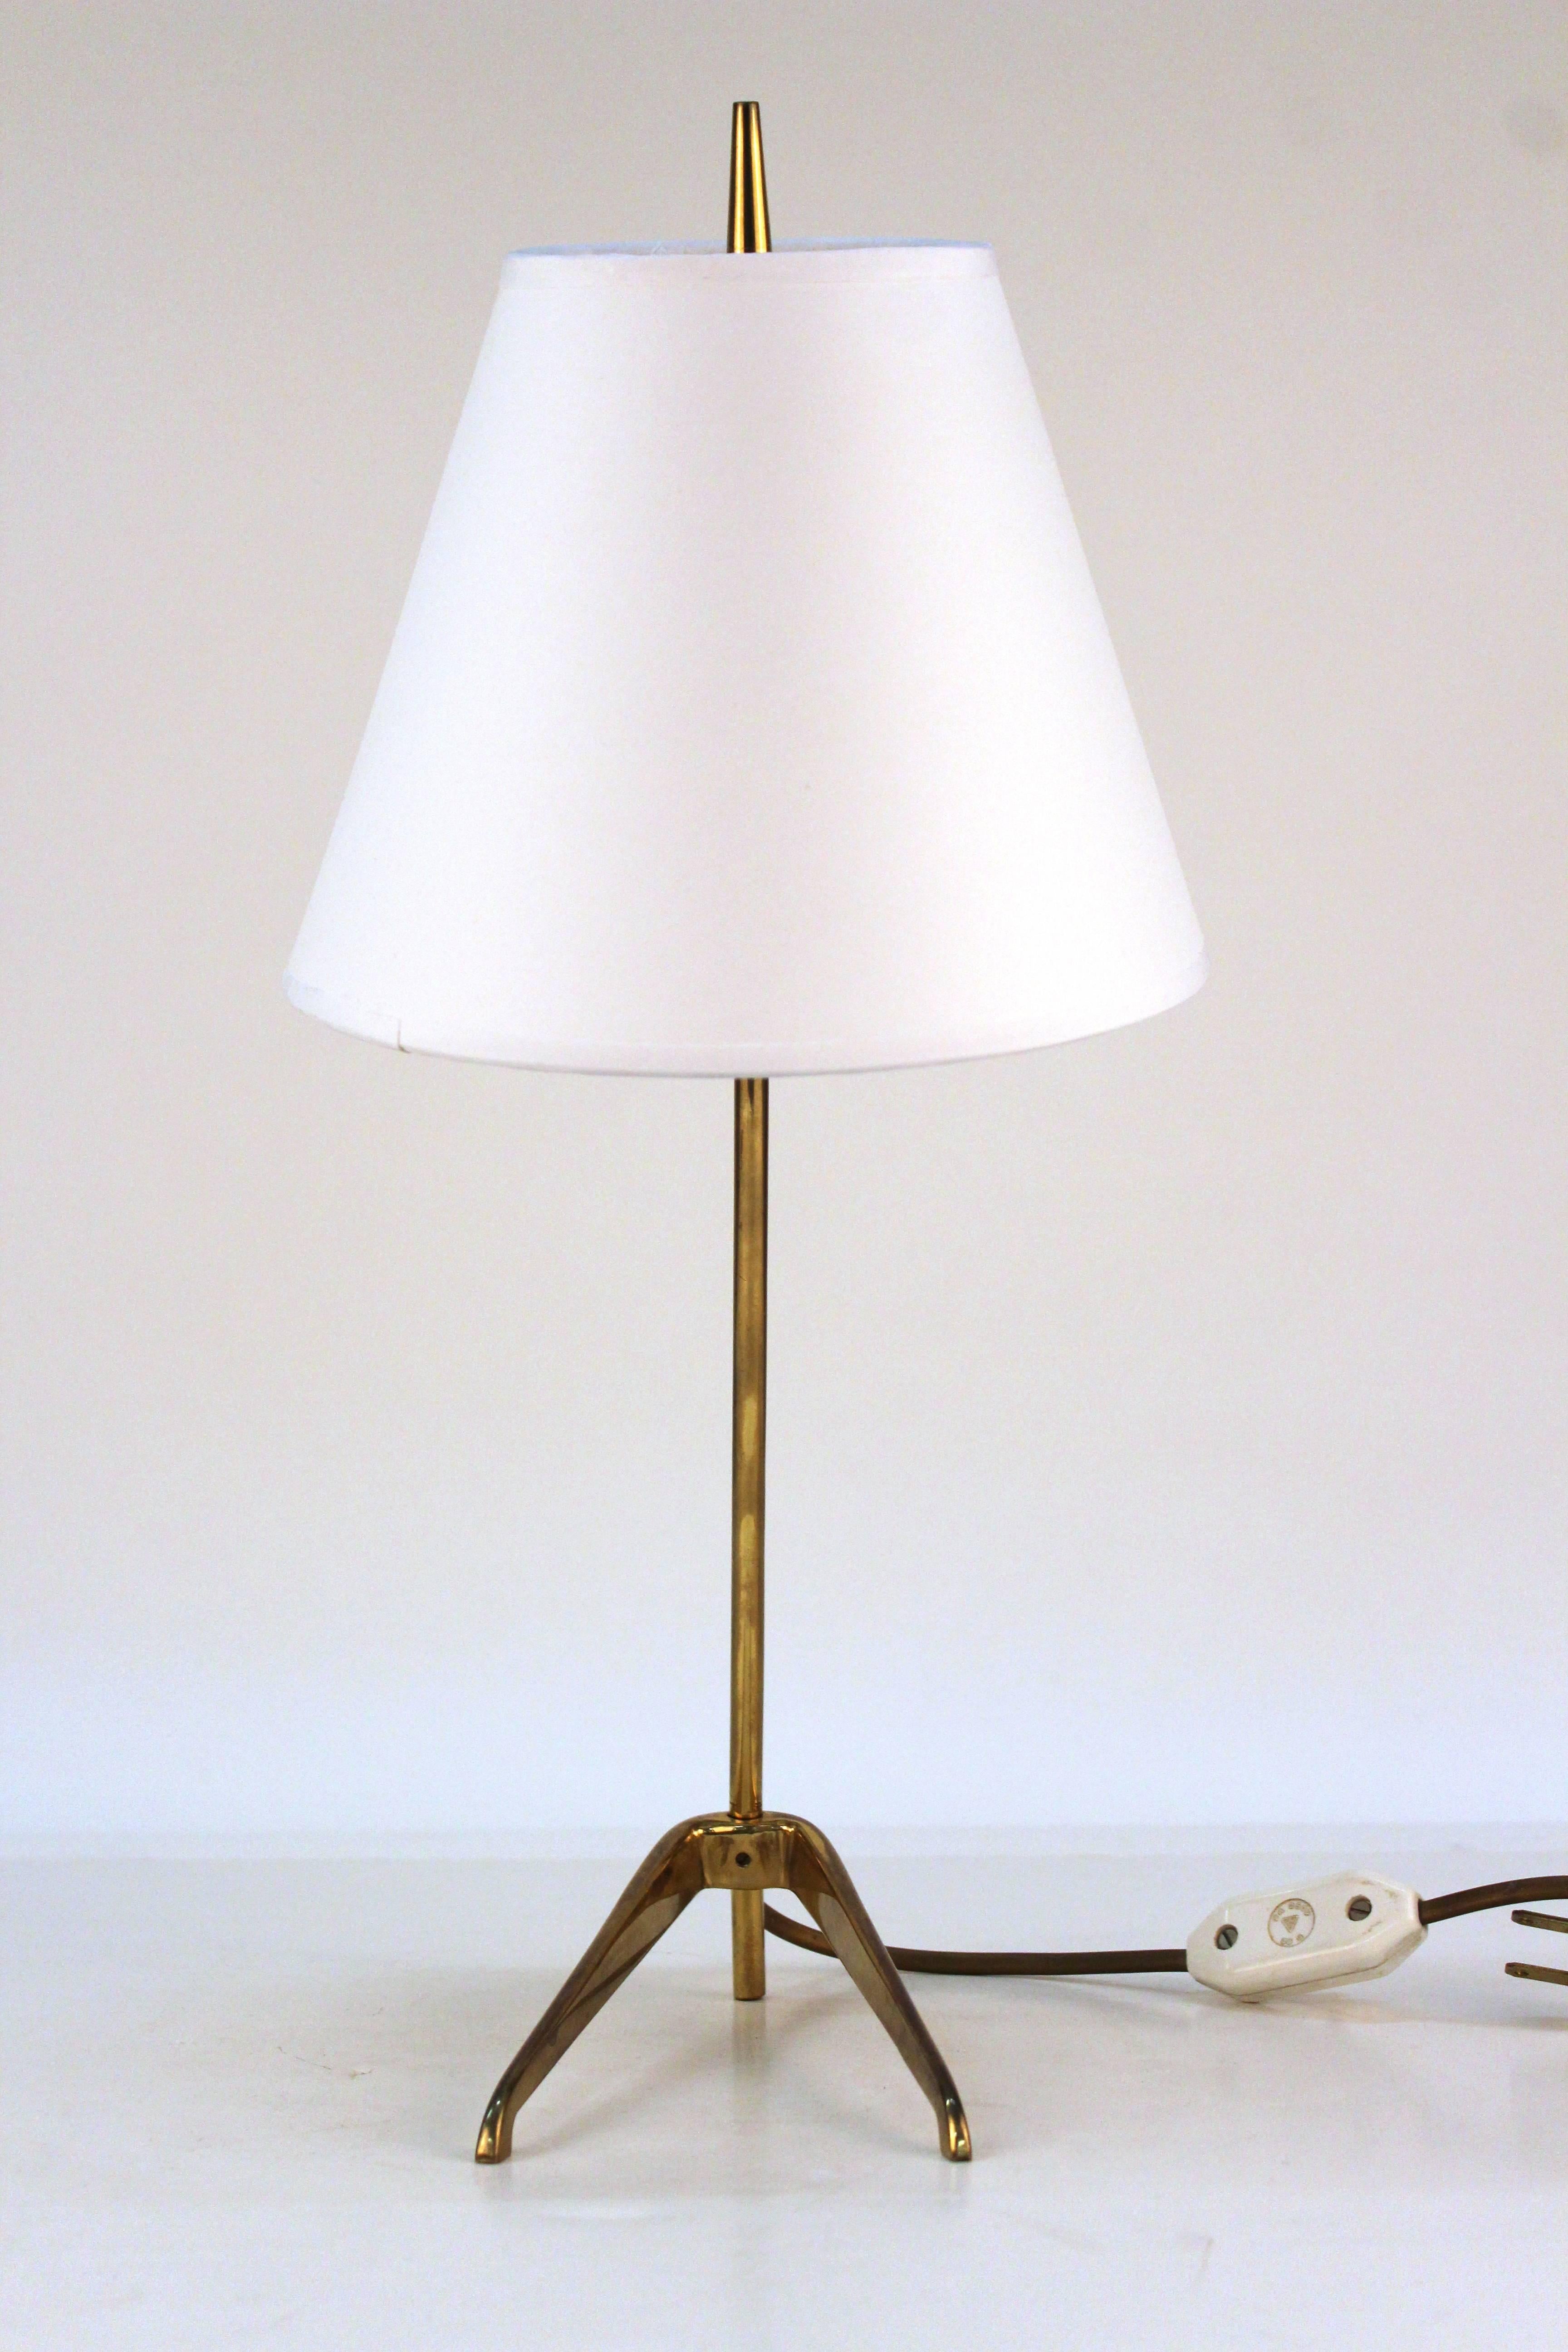 A Mid-Century desk lamp produced in Germany leans on two brass legs at a stylish angle.